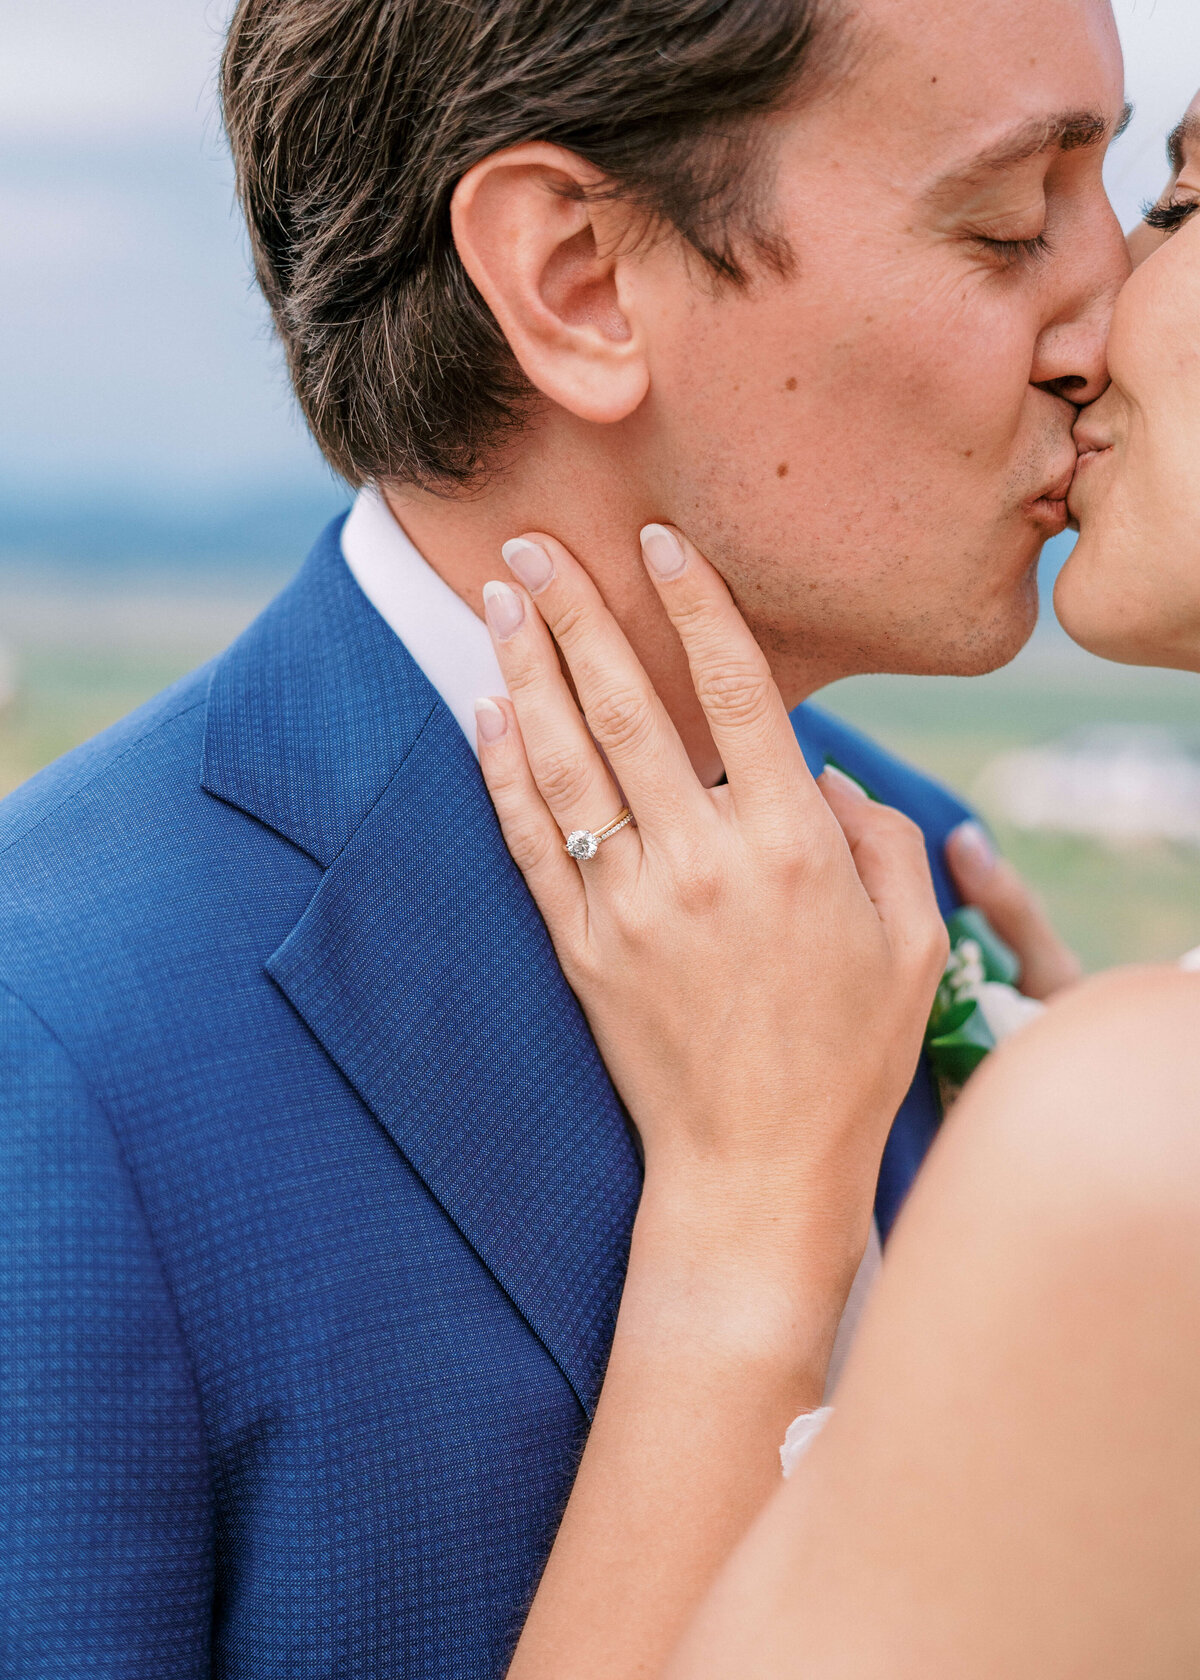 Bride shows off her ring while kissing her new husband